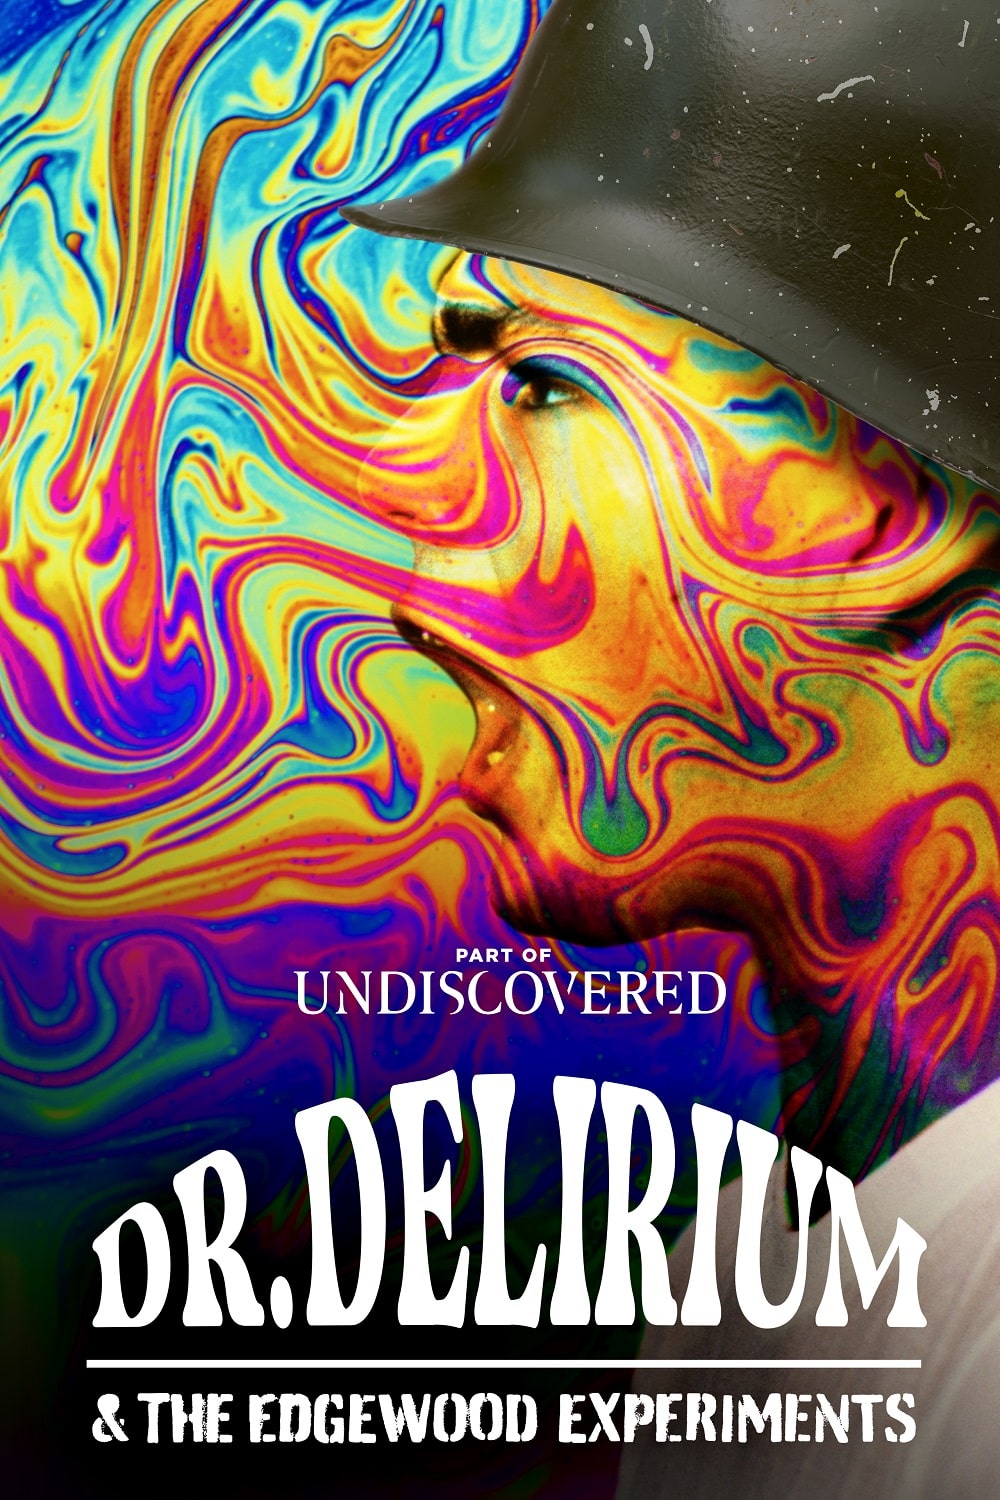 Dr. Delirium And The Edgewood Experiments packshot